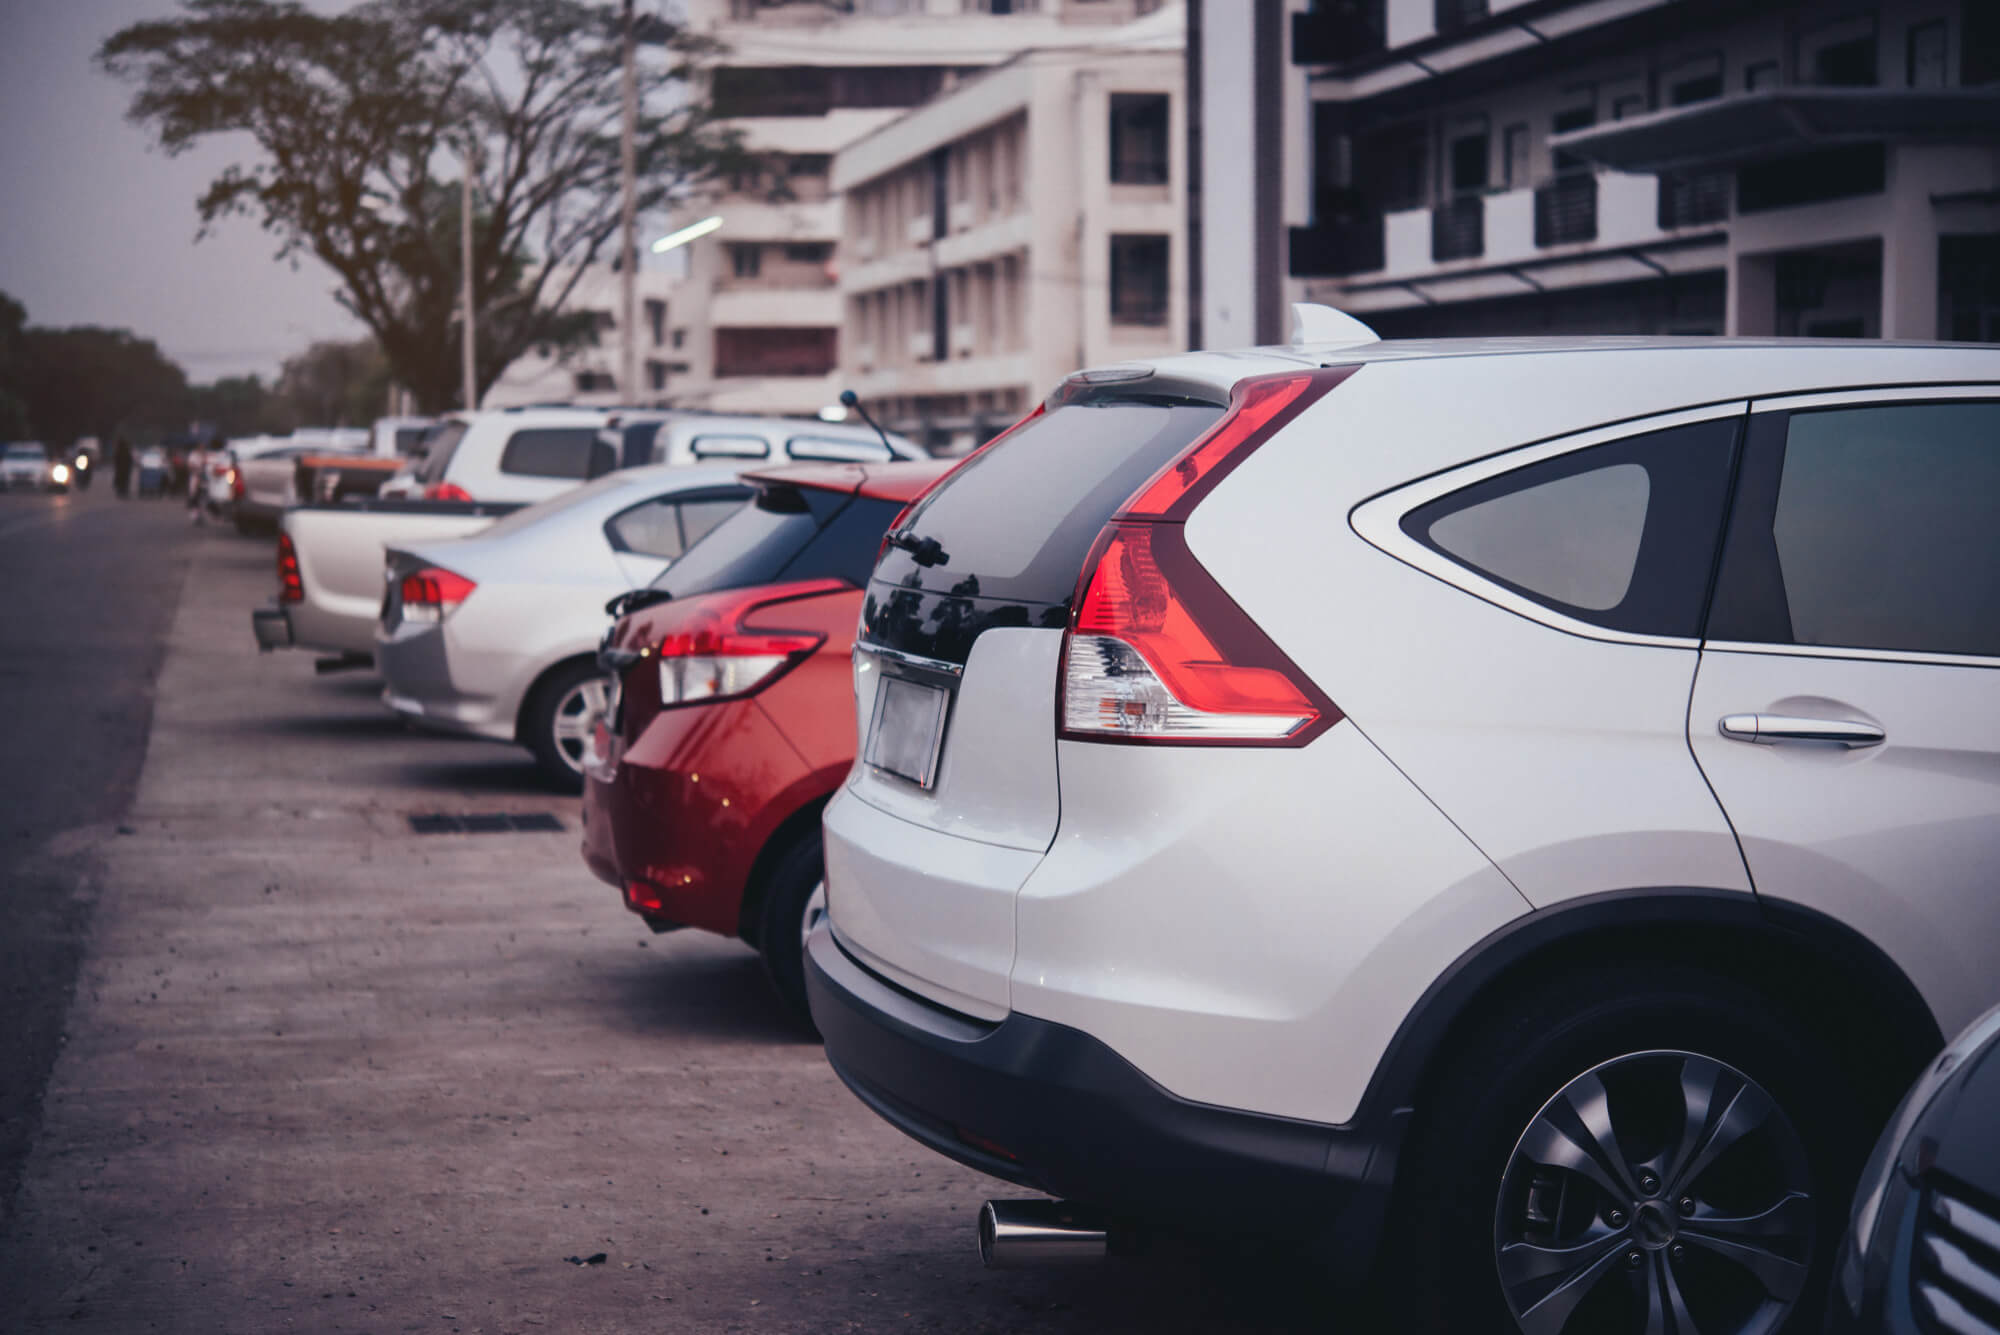 A image of parked cars.